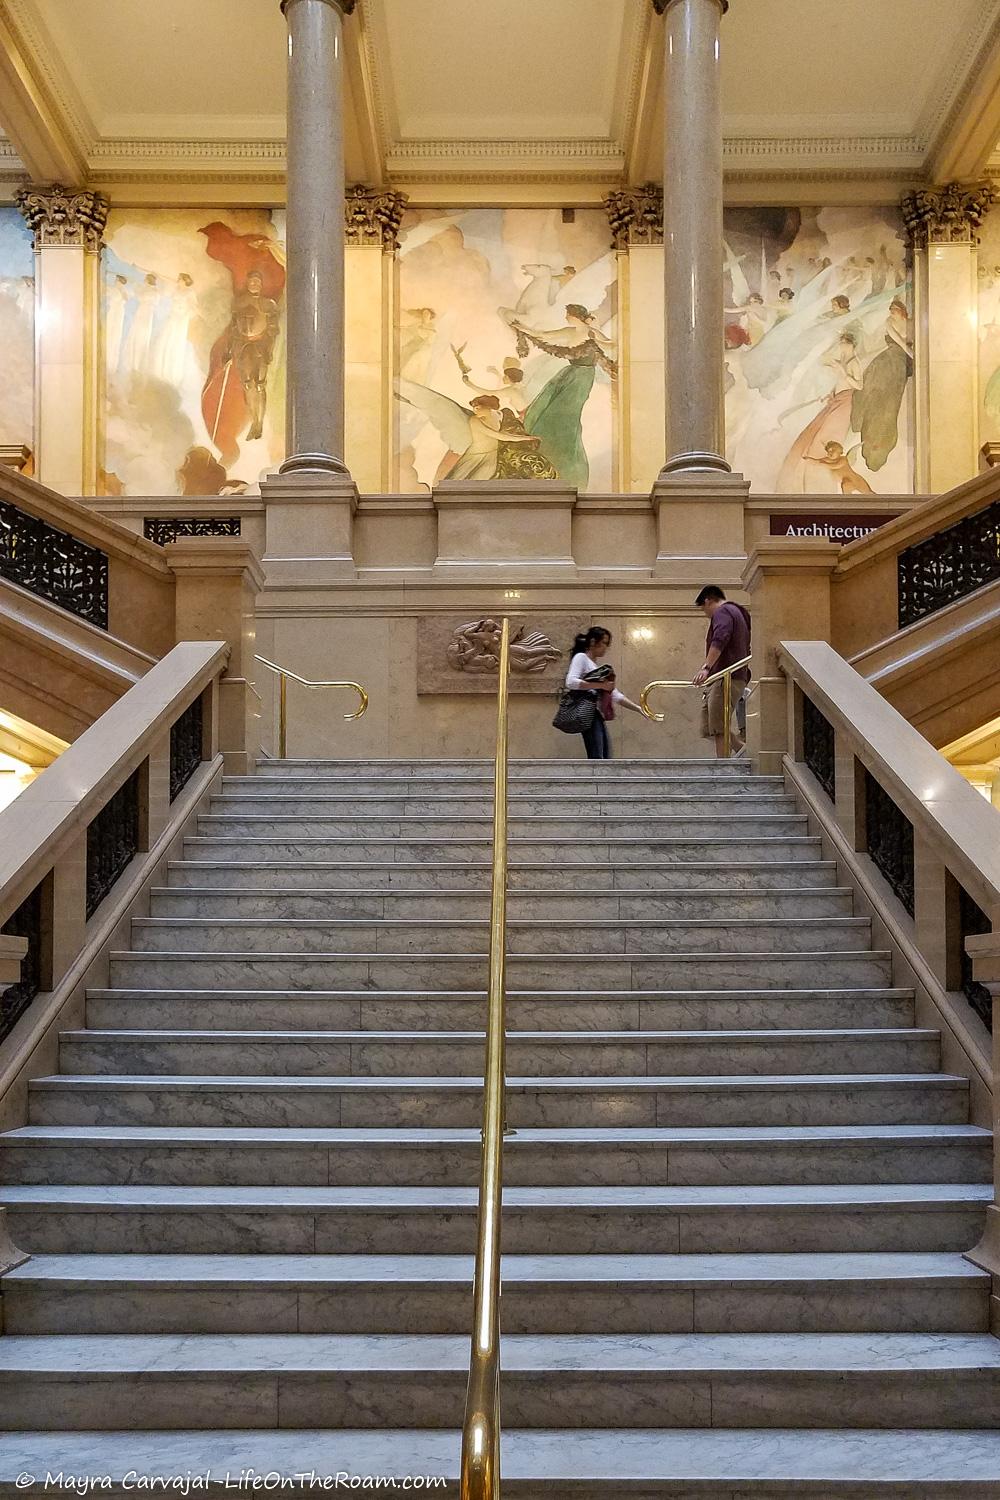 A big marble stair with art painting at the top